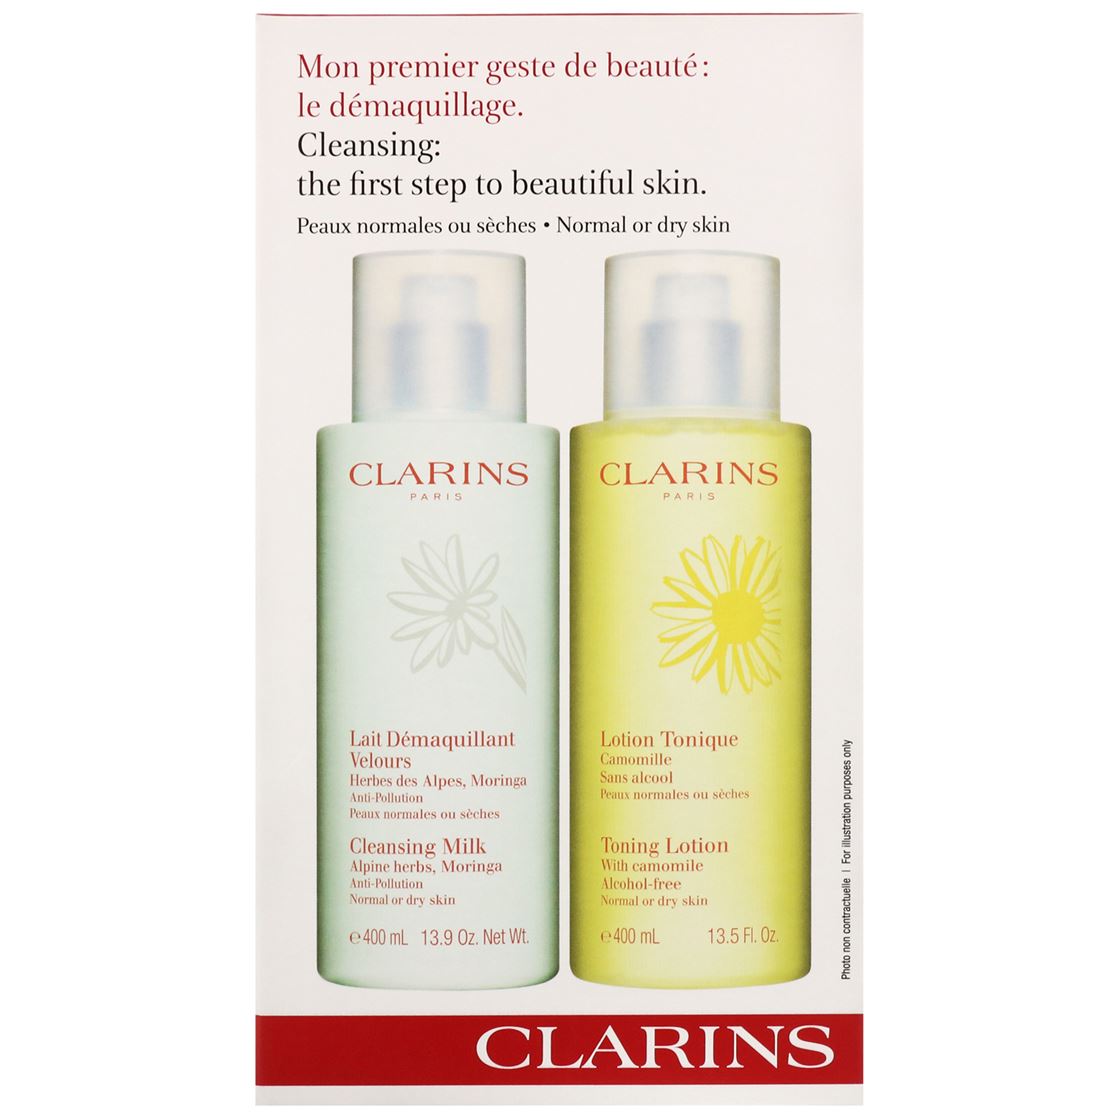 vurdere Peru marts Clarins Cleansers and Toners Gift Set – Dry/Normal Skin 400ml Cleansing  Milk + 400ml Toning Lotion | Perfumes of London